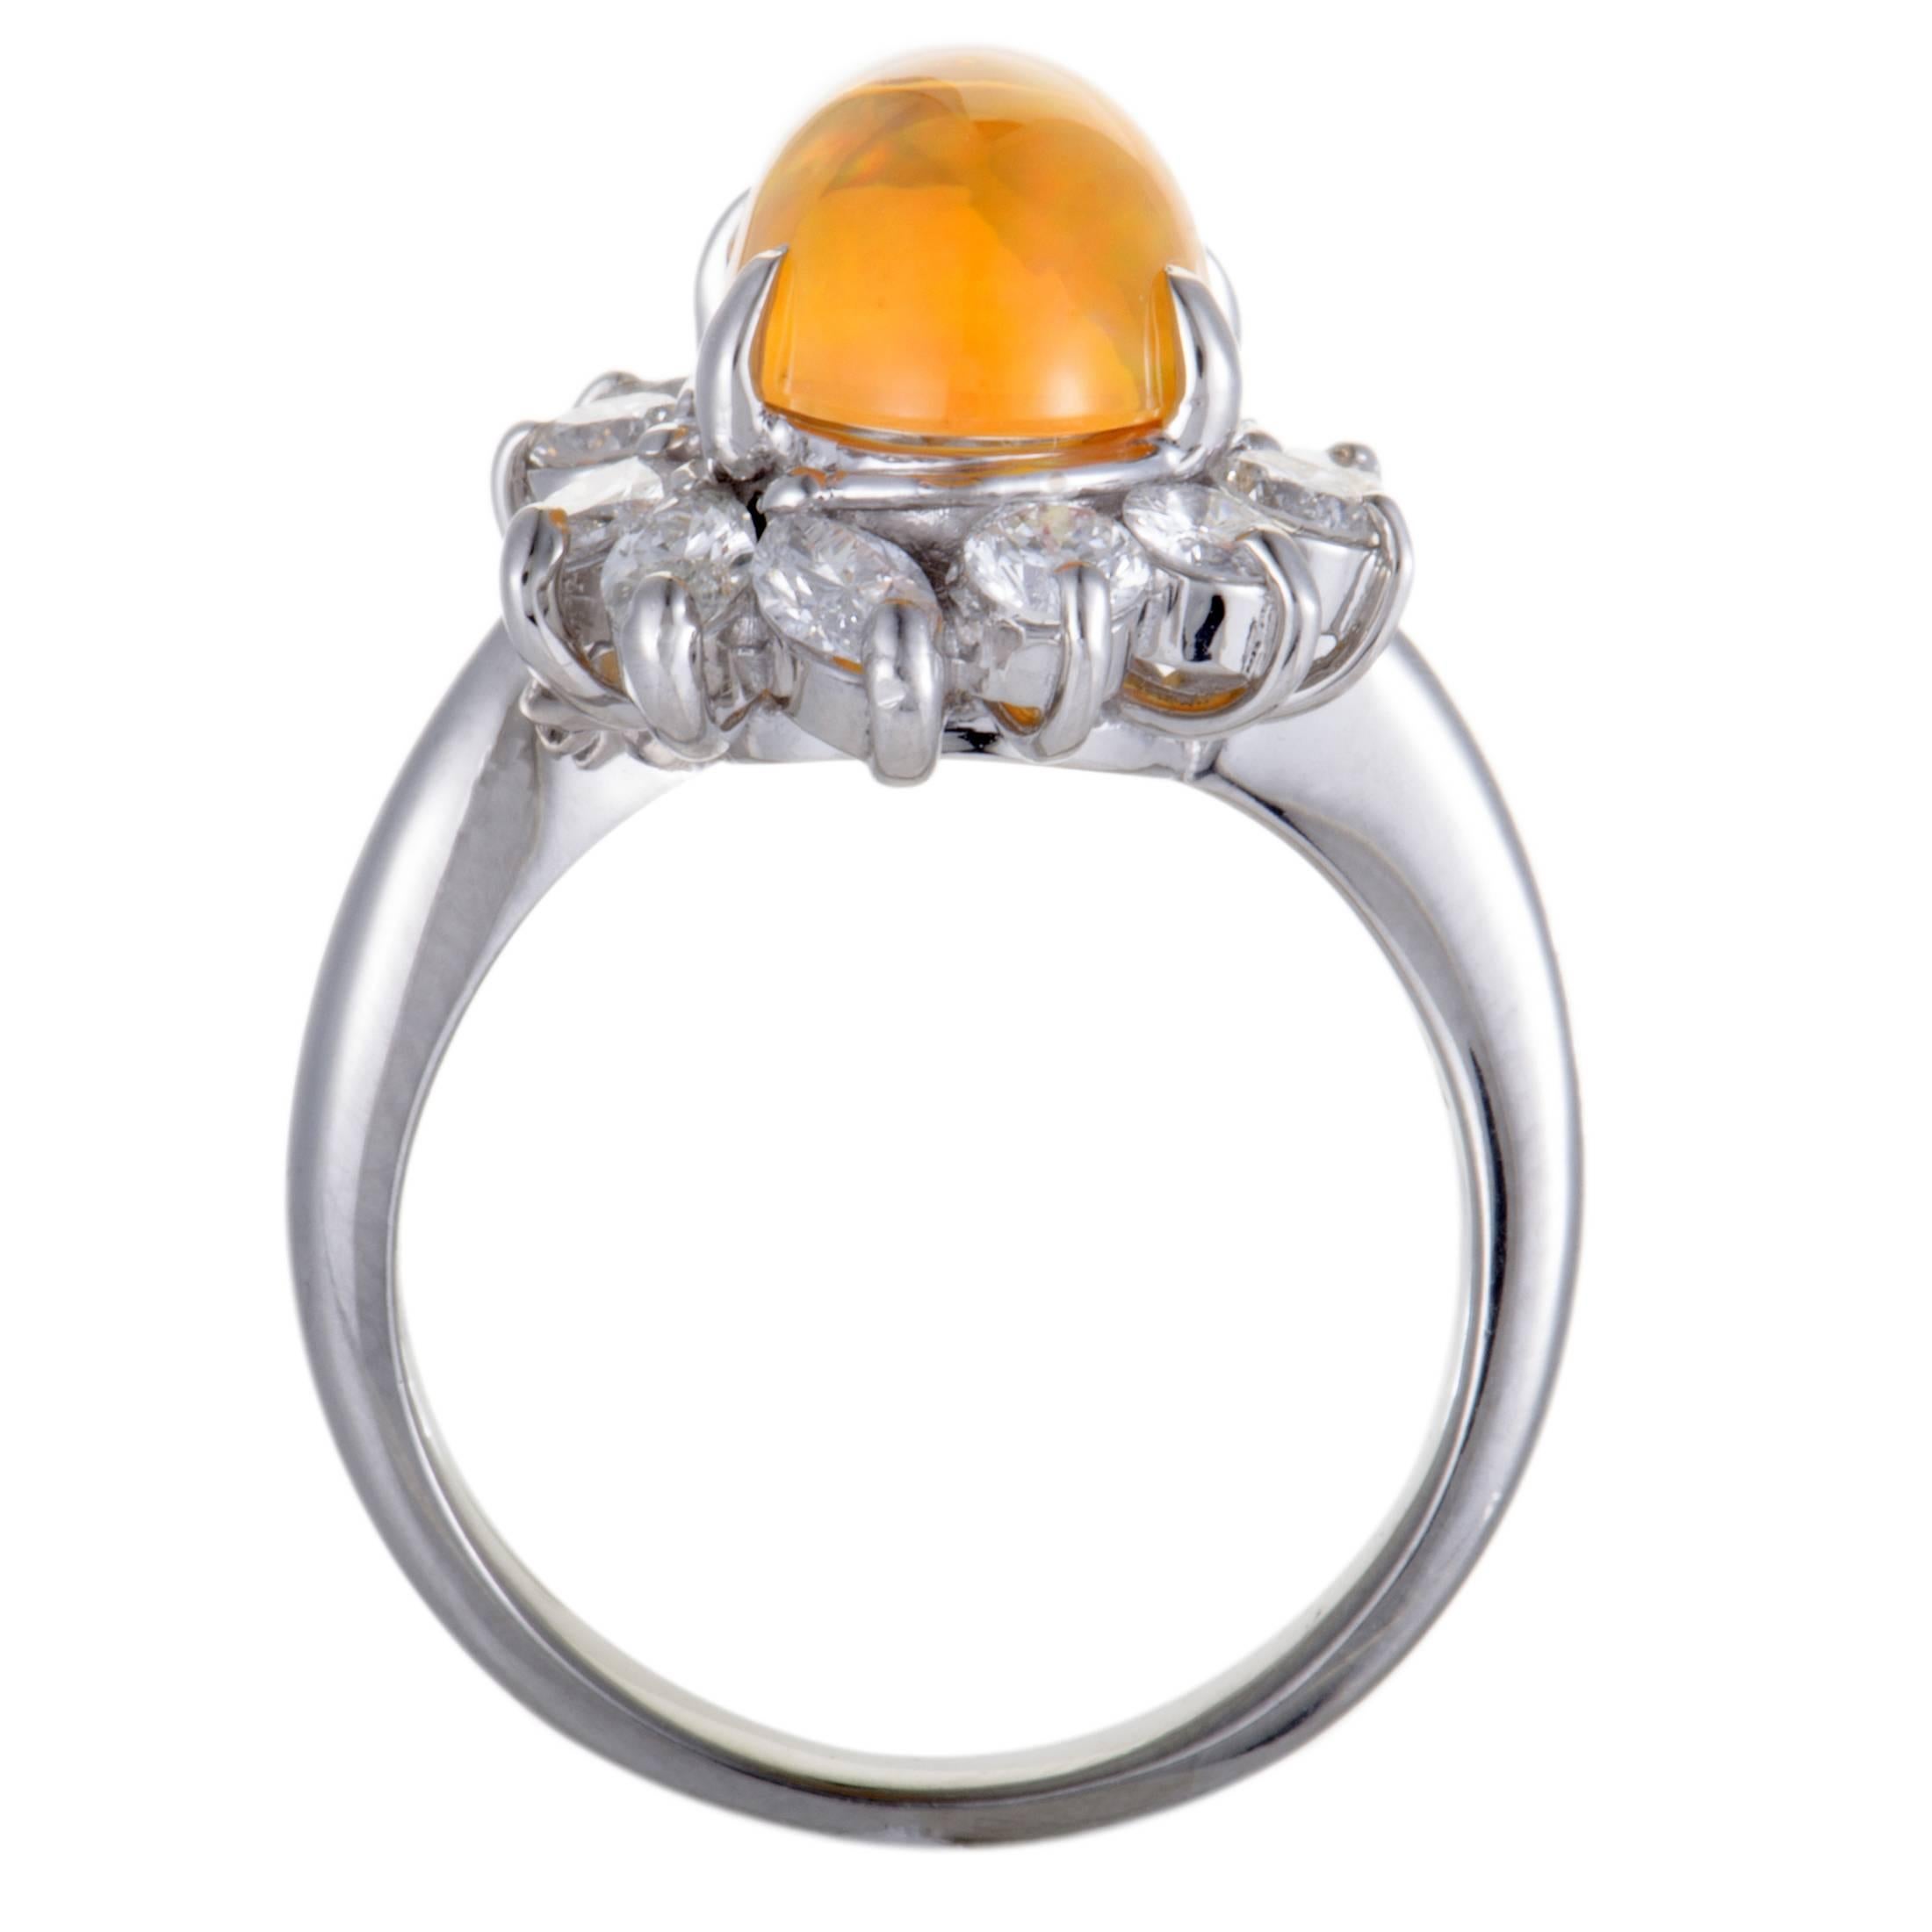 Featuring a splendidly elegant design, this ring offers an alluringly refined appearance. The attractive ring is made of classy platinum and set with 1.34ct of sparkling diamonds around a captivating fire opal, weighing 2.95ct.
Ring Top Dimensions: